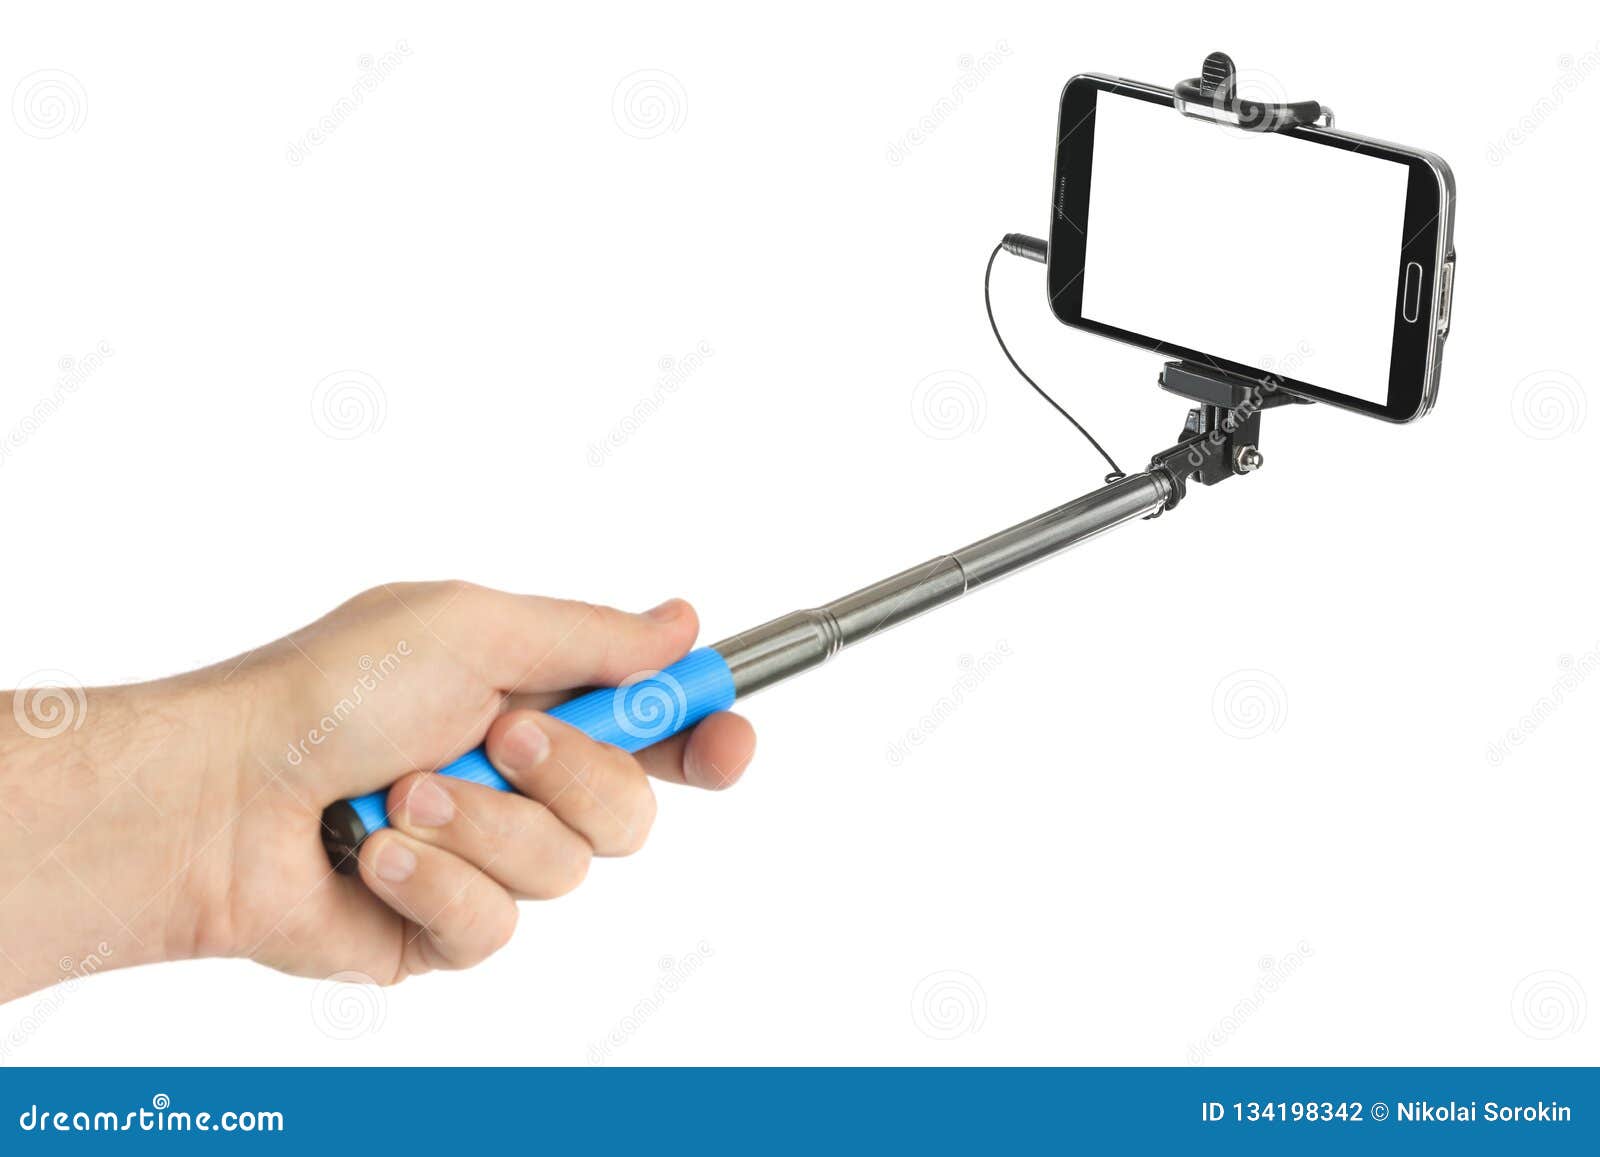 hand and smartphone with selfie stick